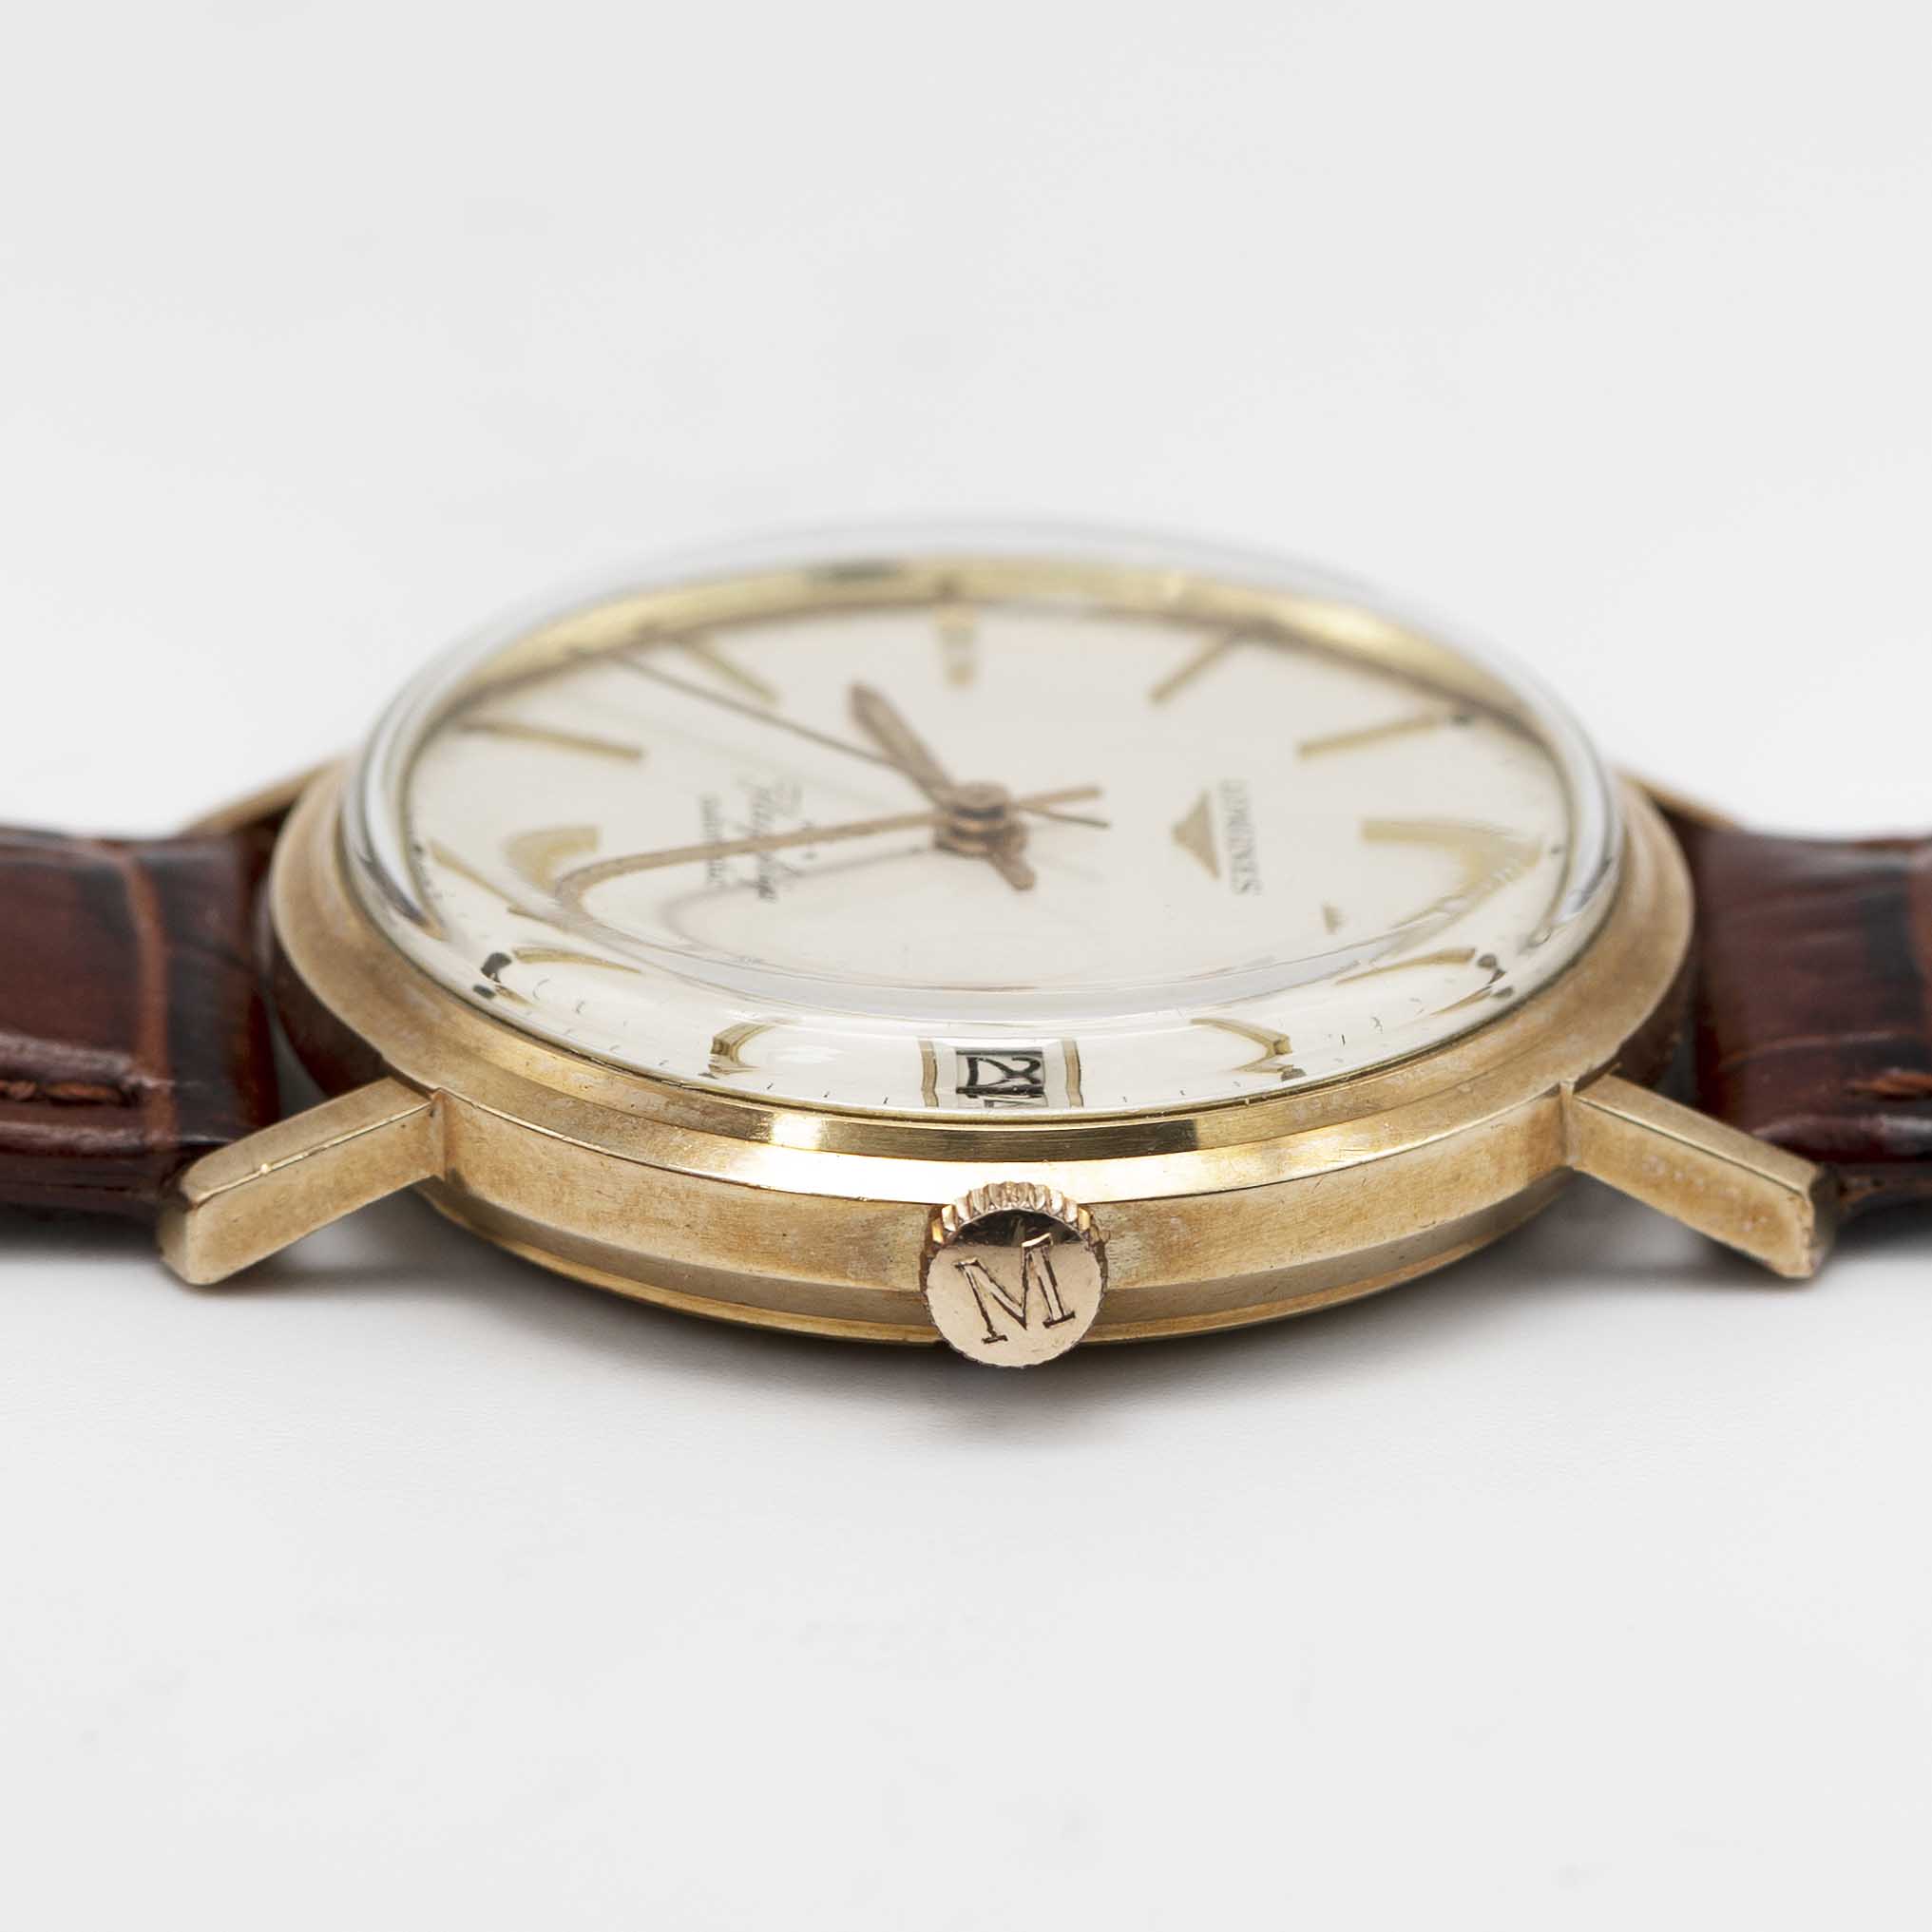 A GENTLEMAN'S 9CT SOLID GOLD LONGINES FLAGSHIP AUTOMATIC WRIST WATCH CIRCA 1966, REF. 3418 WITH - Image 7 of 8